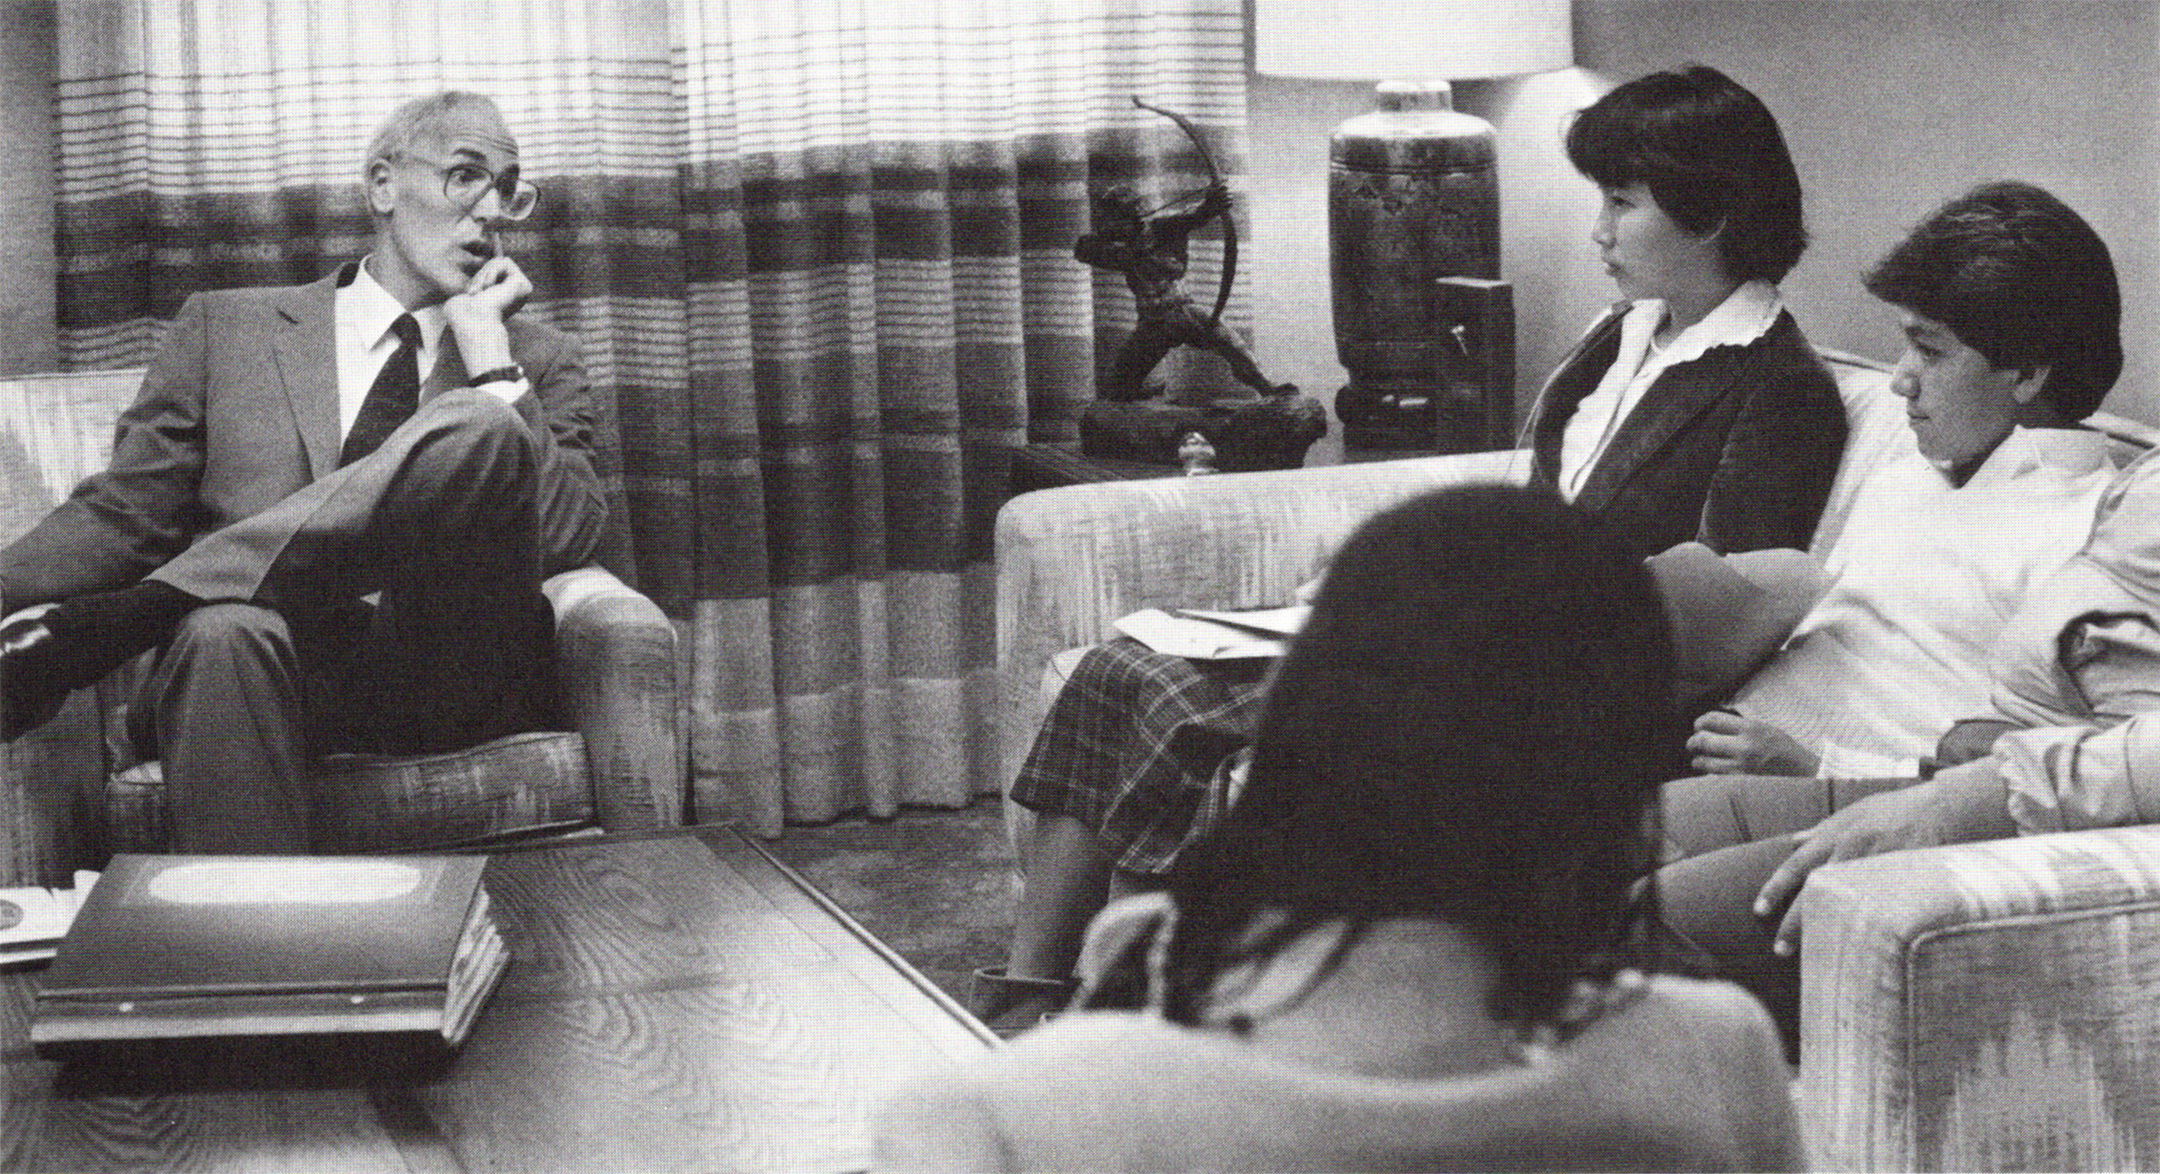 Black and white photo of Bill Honig, on left, speaking with three students in an office